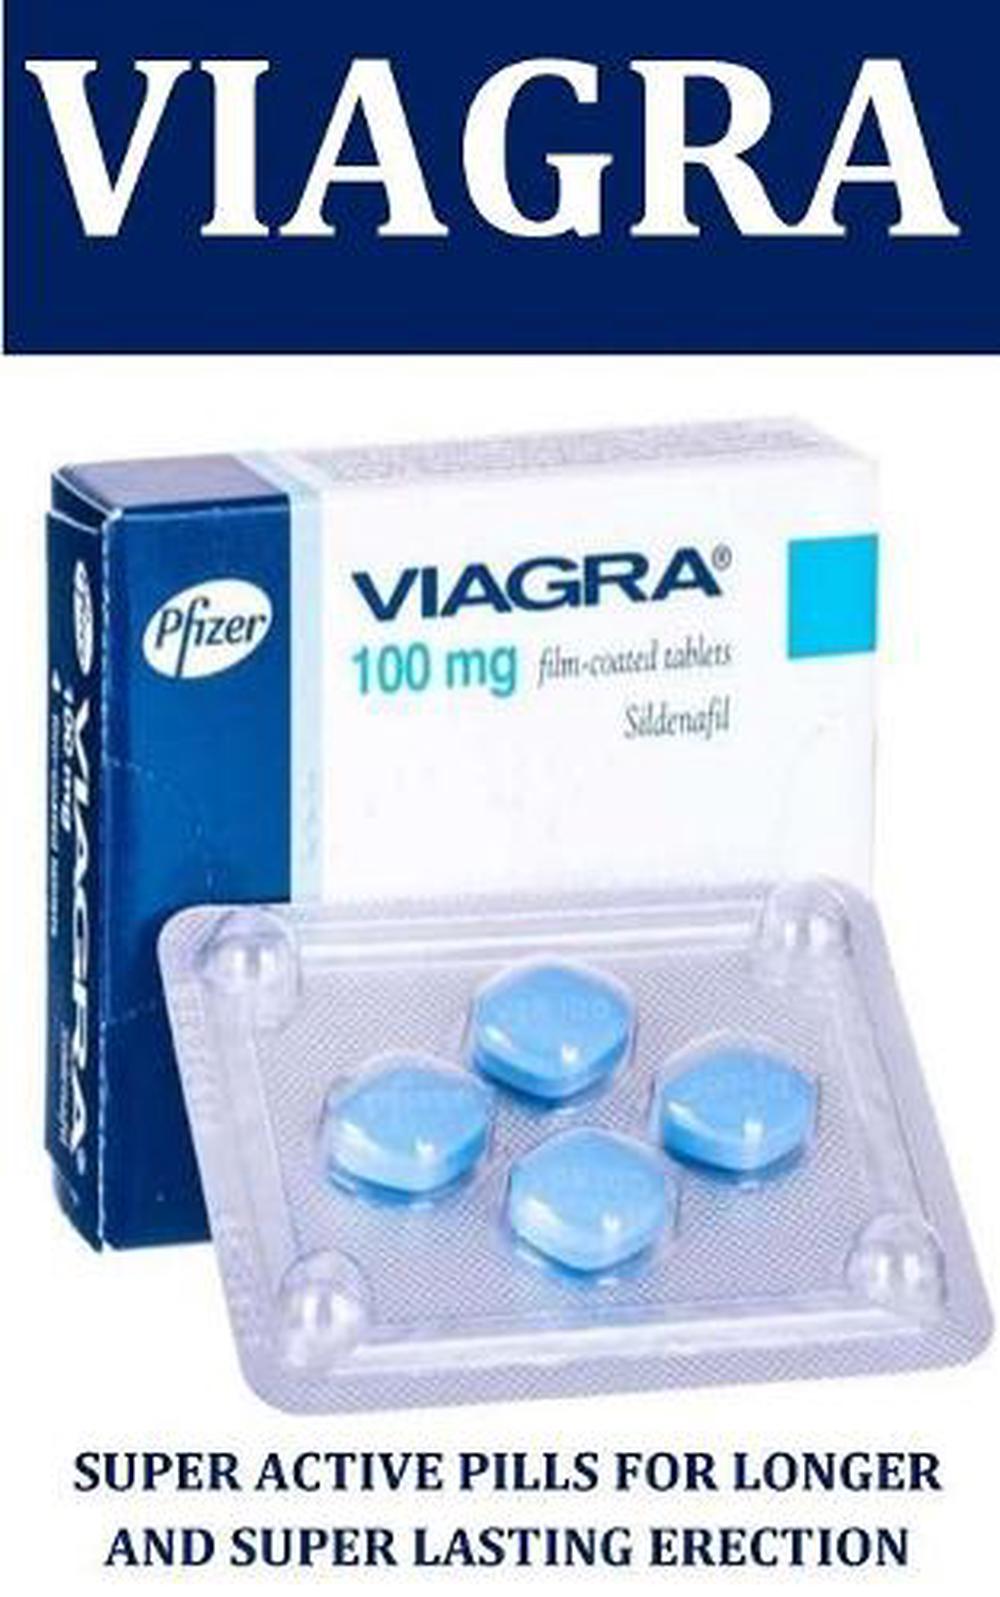 Viagra by Hamber Blessing Paperback Book Free Shipping! | eBay